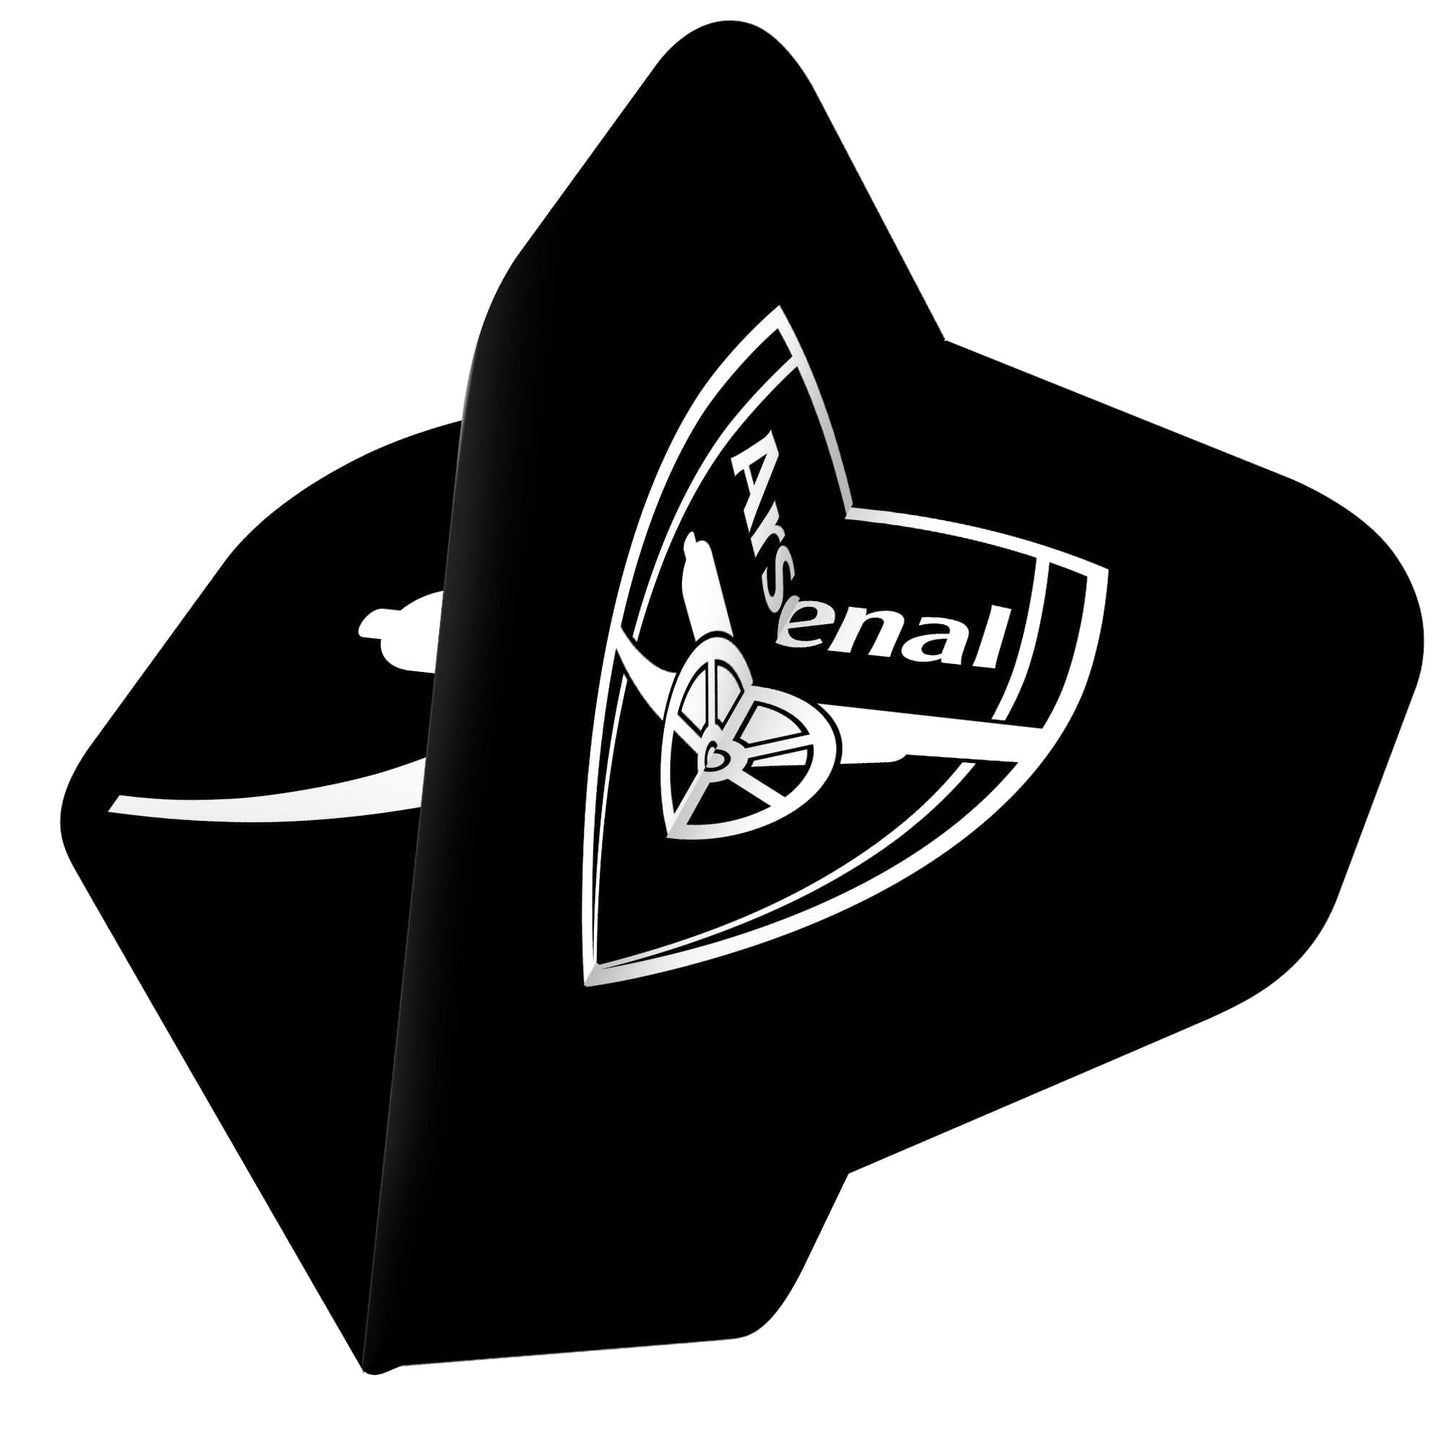 Arsenal FC Dart Flights - Official Licensed - No2 - Std - The Gunners - F2 - Black - 2 Sided Mono